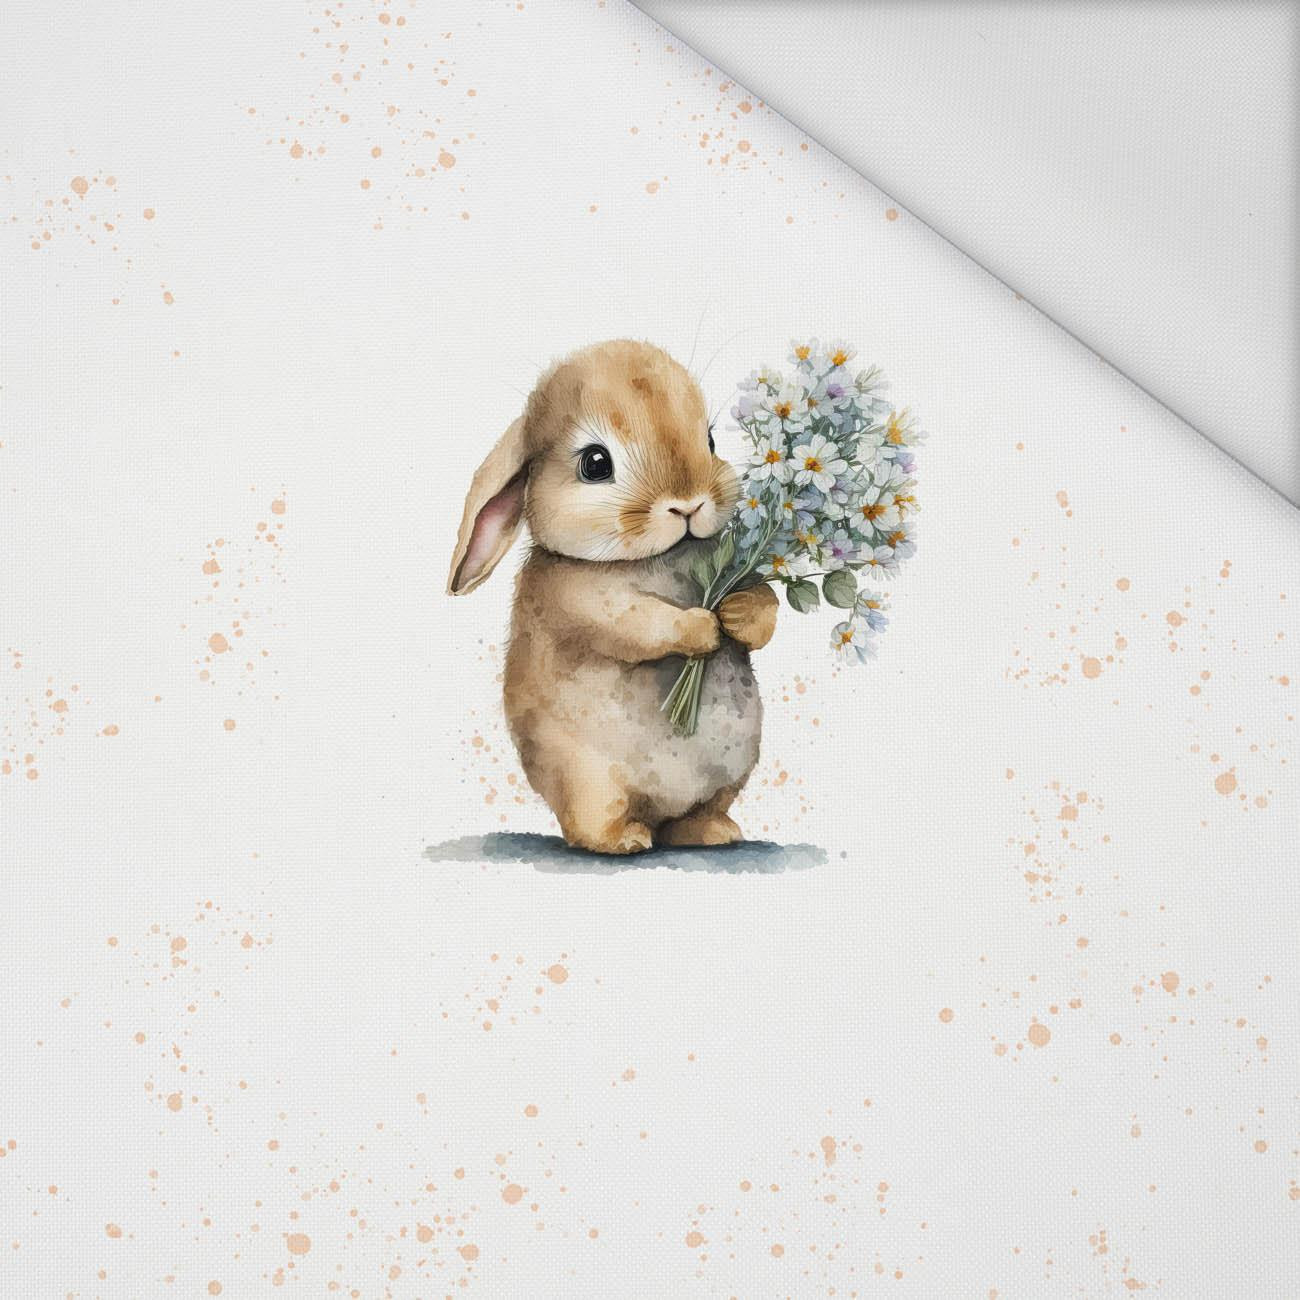 BUNNY WITH A BOUQUET OF FLOWERS - panel (60cm x 50cm) Waterproof woven fabric